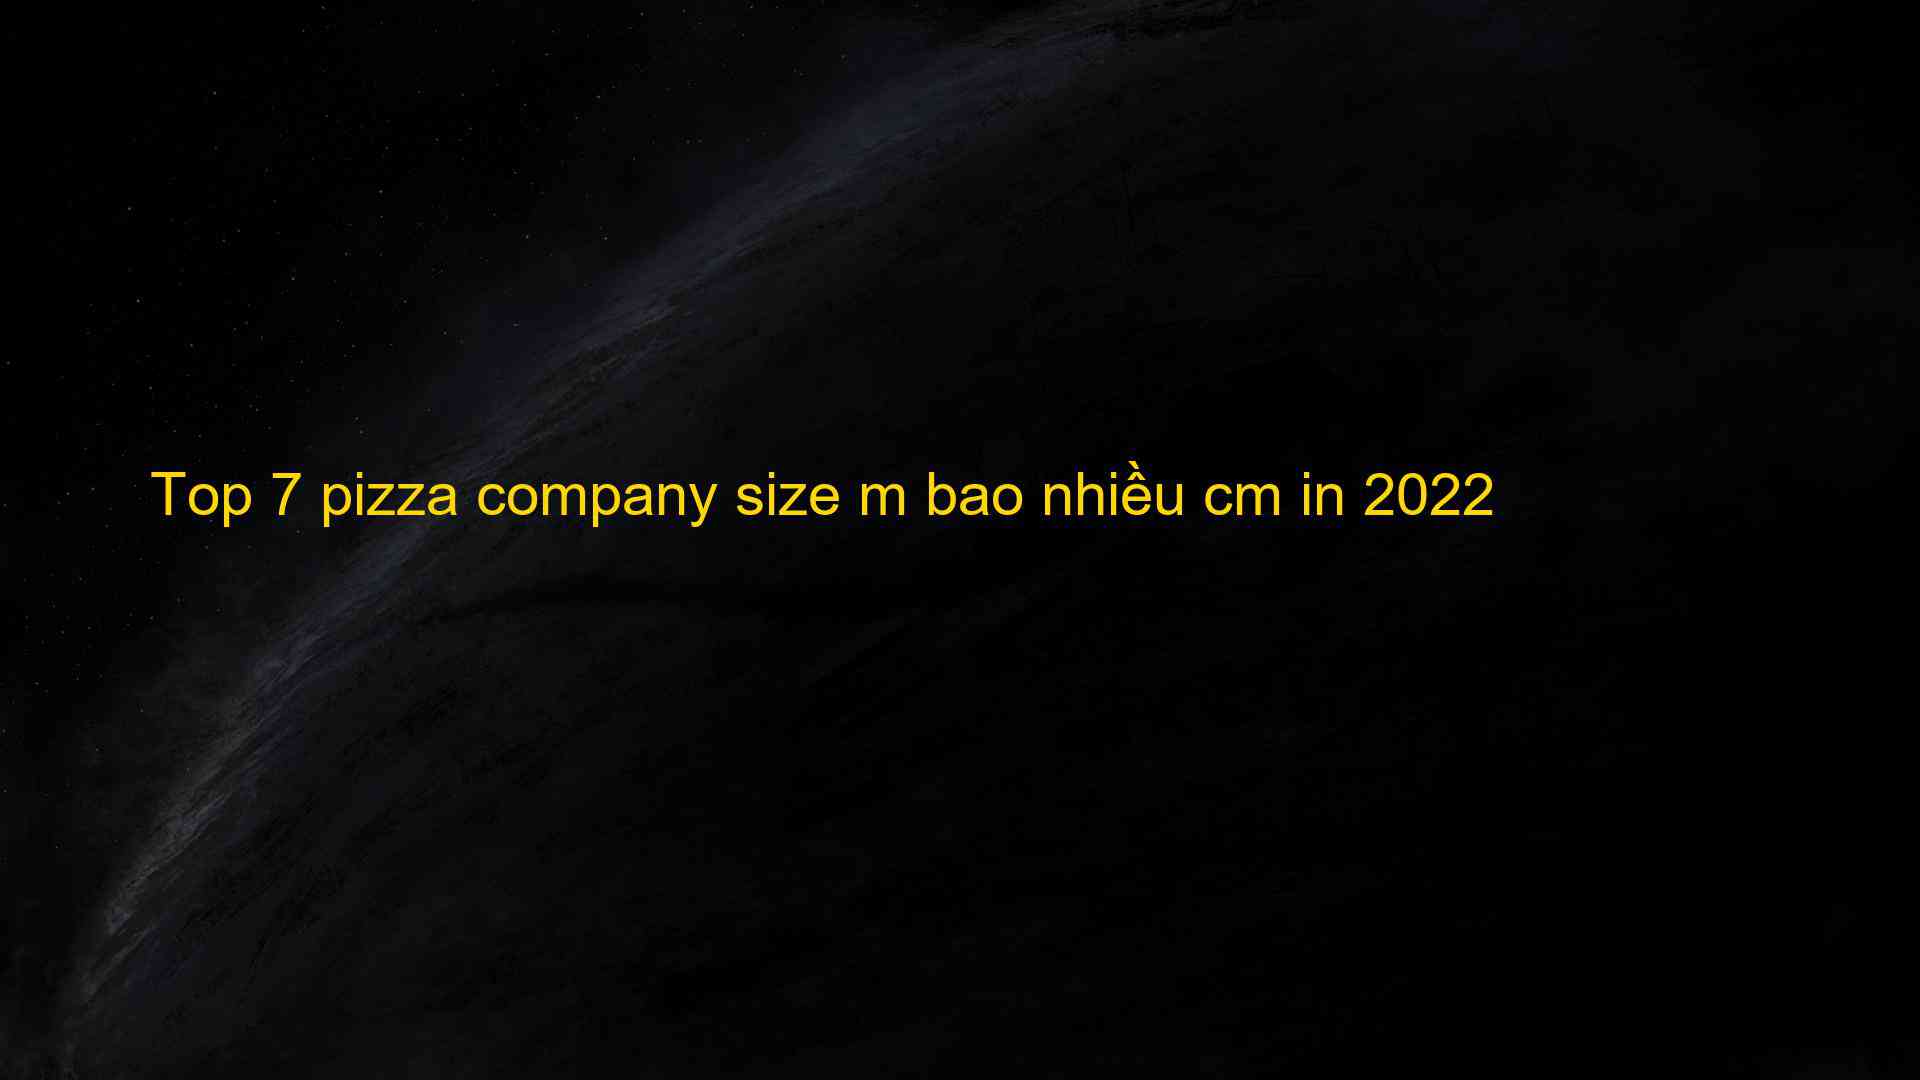 Top 7 pizza company size m bao nhieu cm in 2022 1659491538